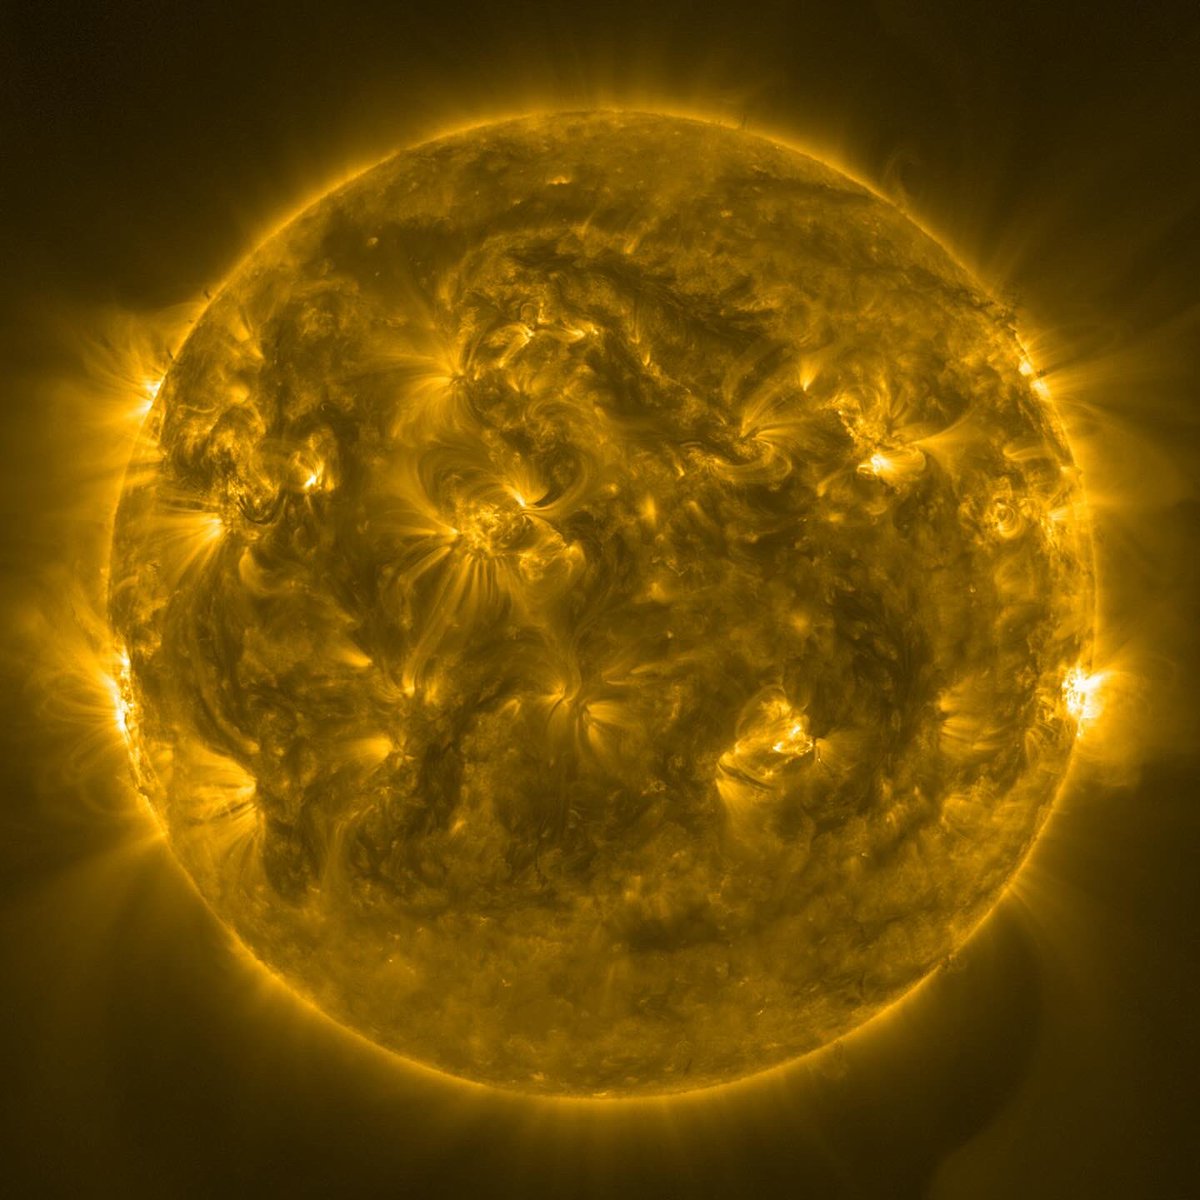 Before vs after: solar edition☀️ Take a look at how the Sun changed in just 2.5 years 🕶️ Our Sun goes through a cycle of activity that lasts around 11 years. As it approaches the solar maximum - expected to occur in 2025 - we are seeing a striking increase in solar activity…